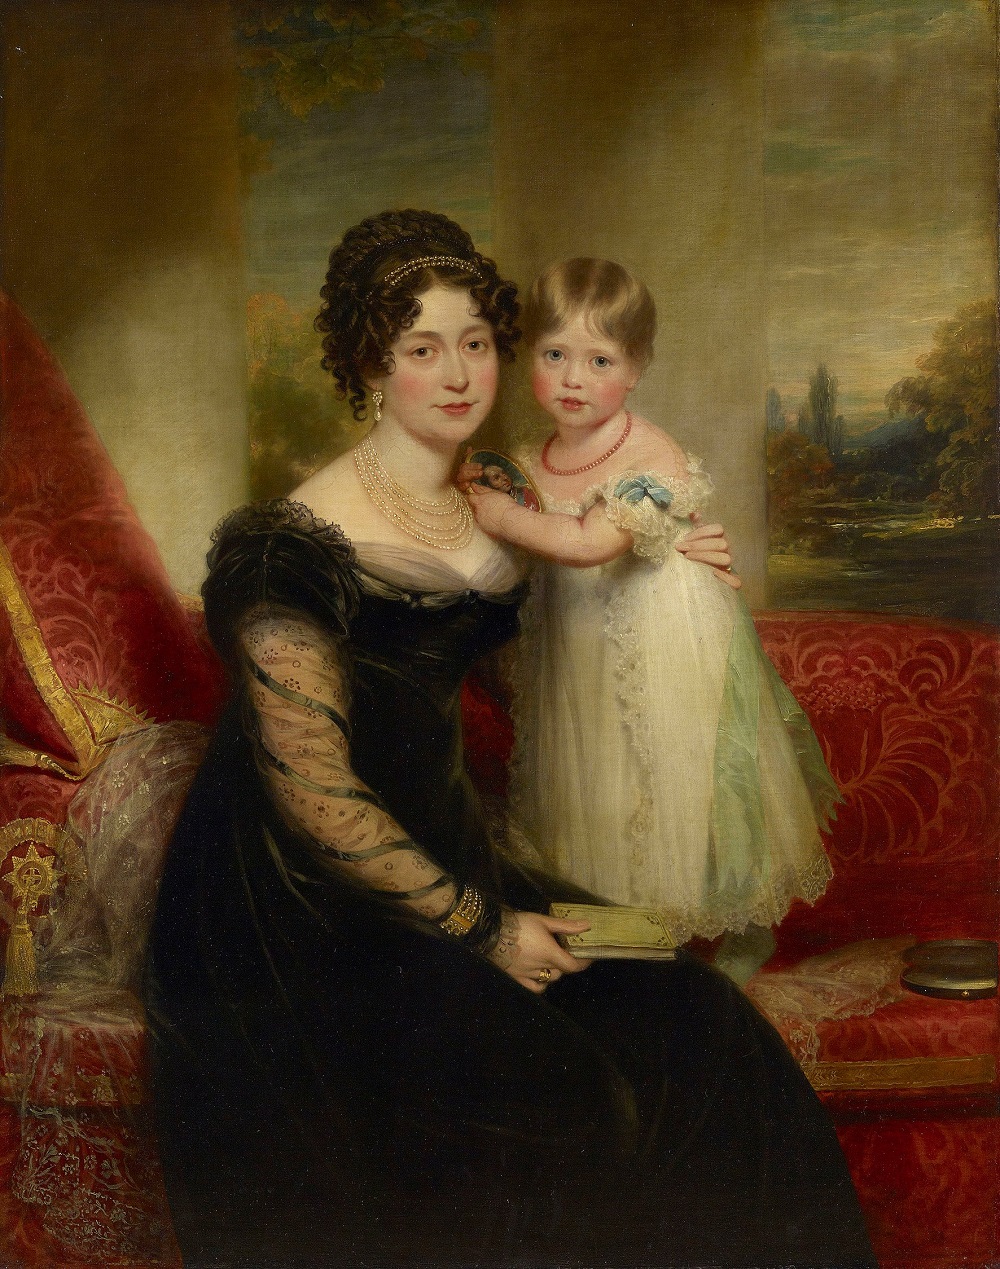 Portrait of Princess Victoria and Victoria, Duchess of Kent by William Beechey